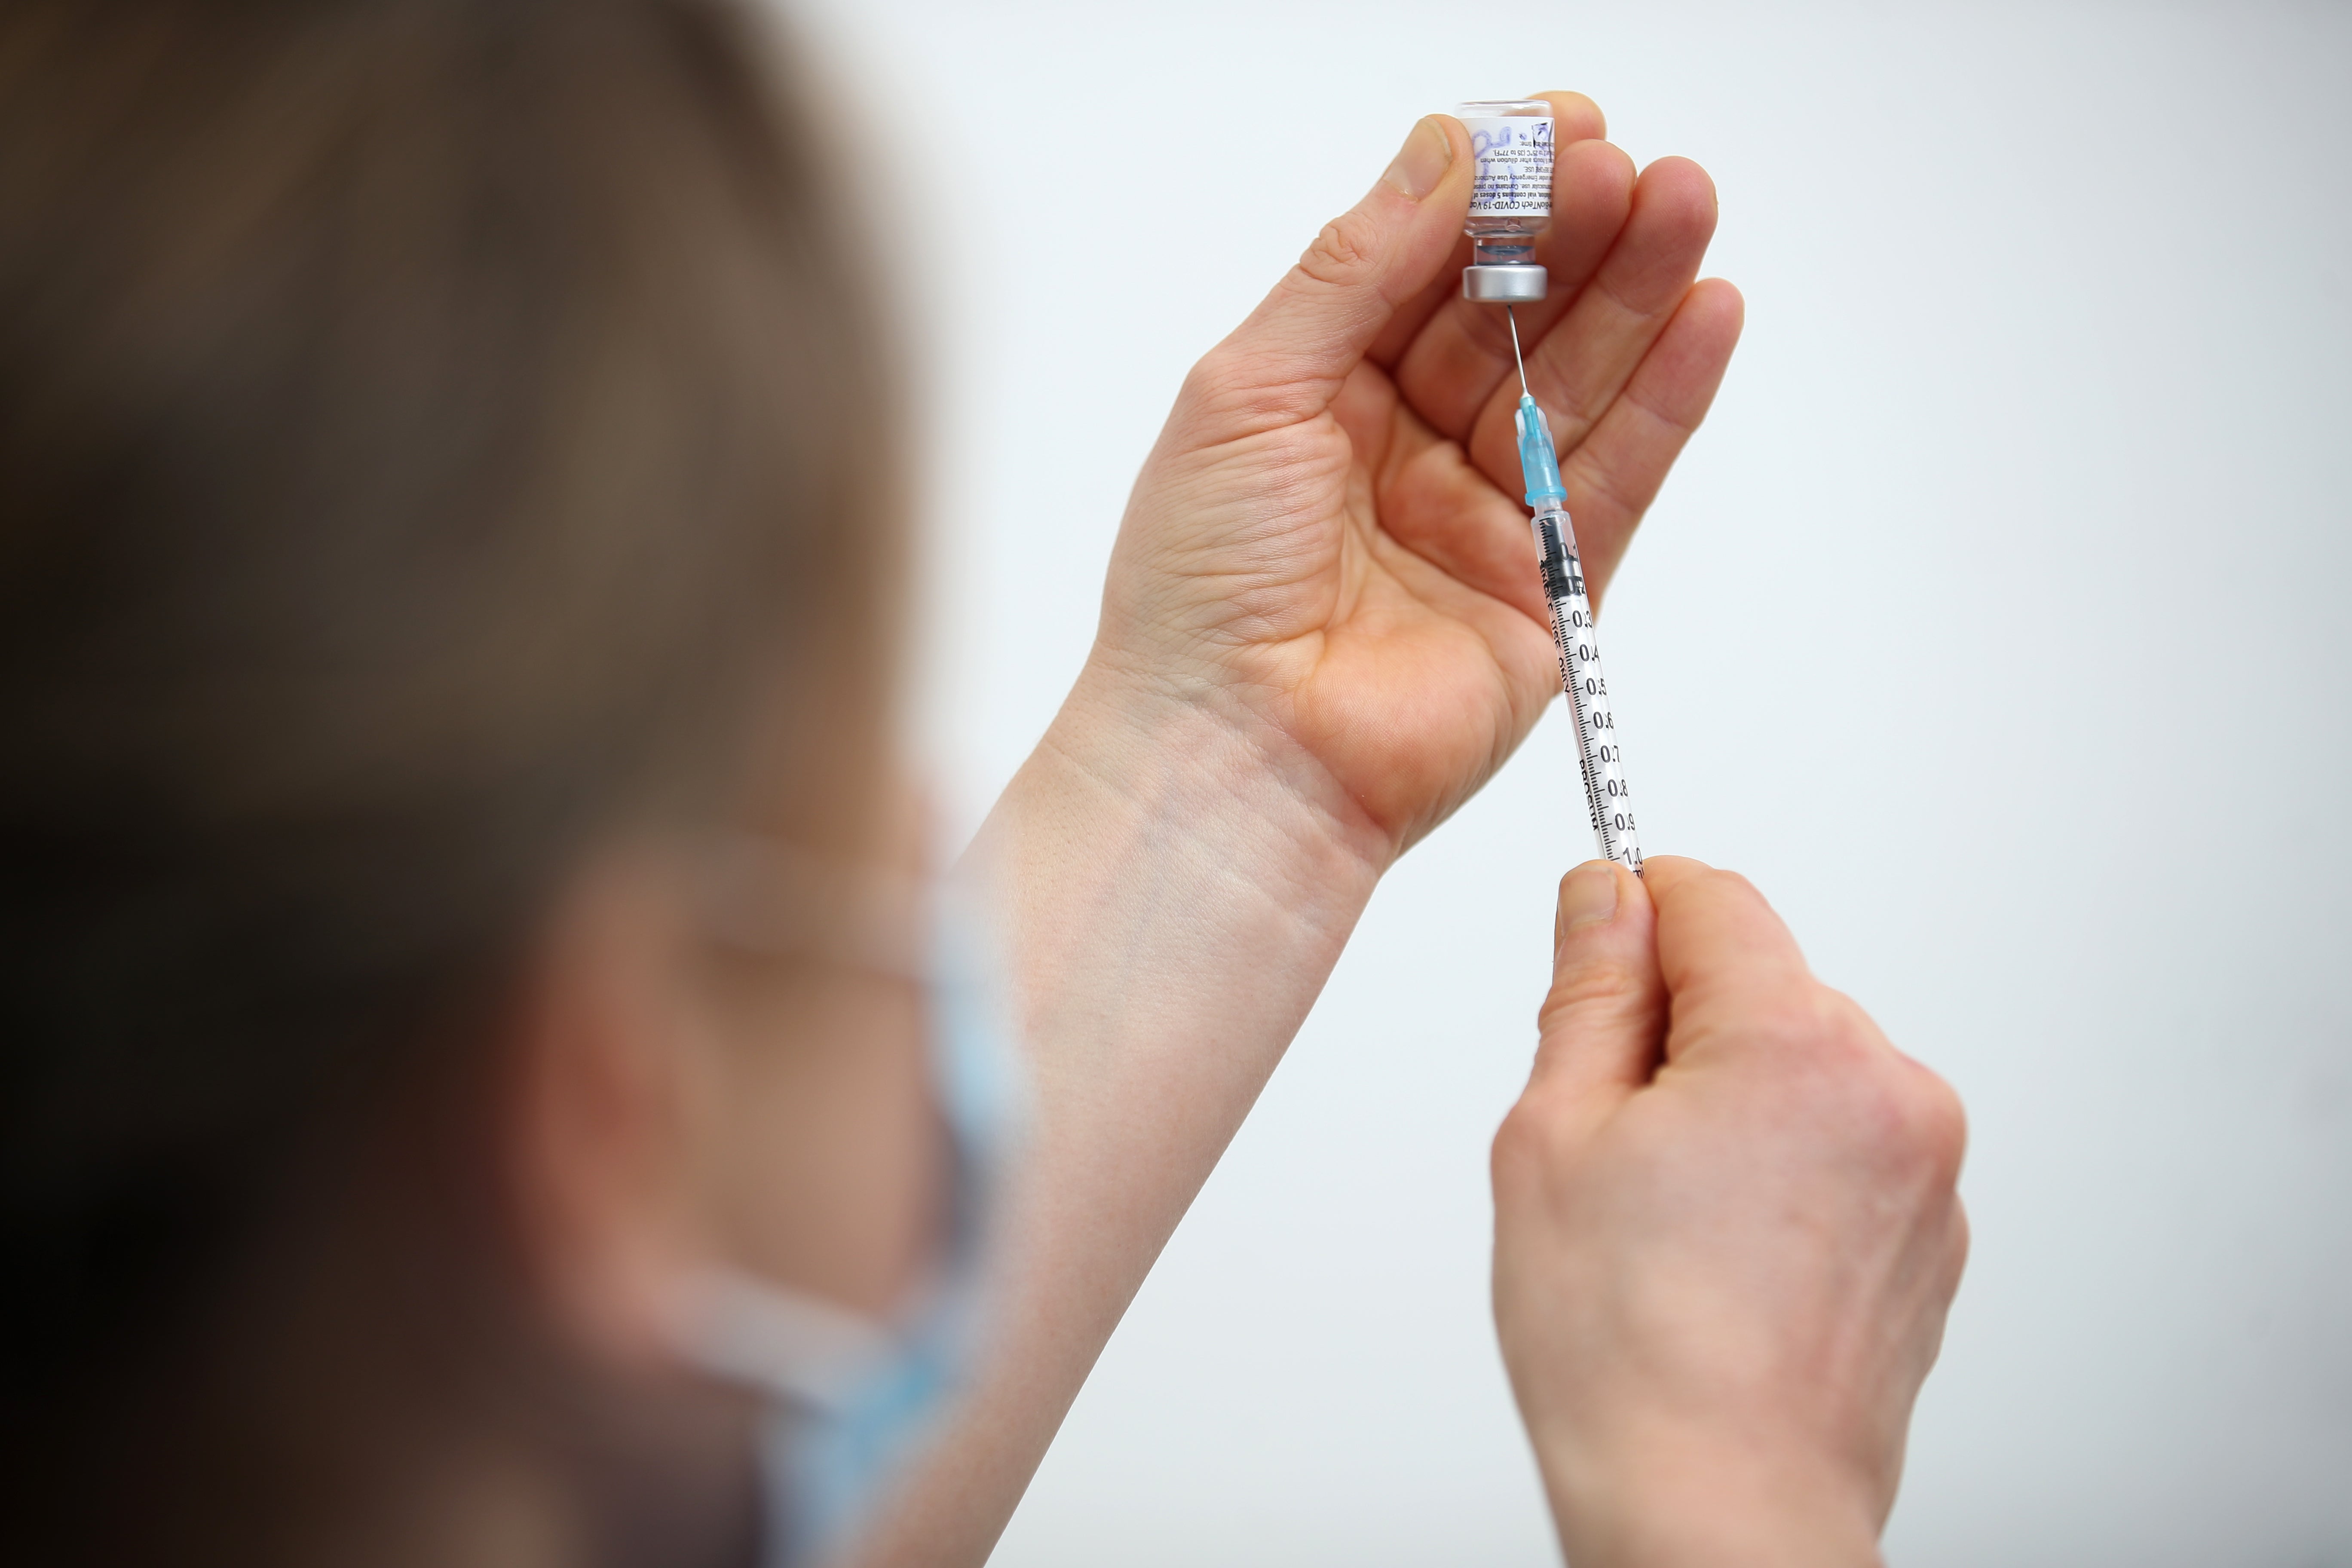 Mandatory Covid vaccinations for NHS staff to be introduced next year